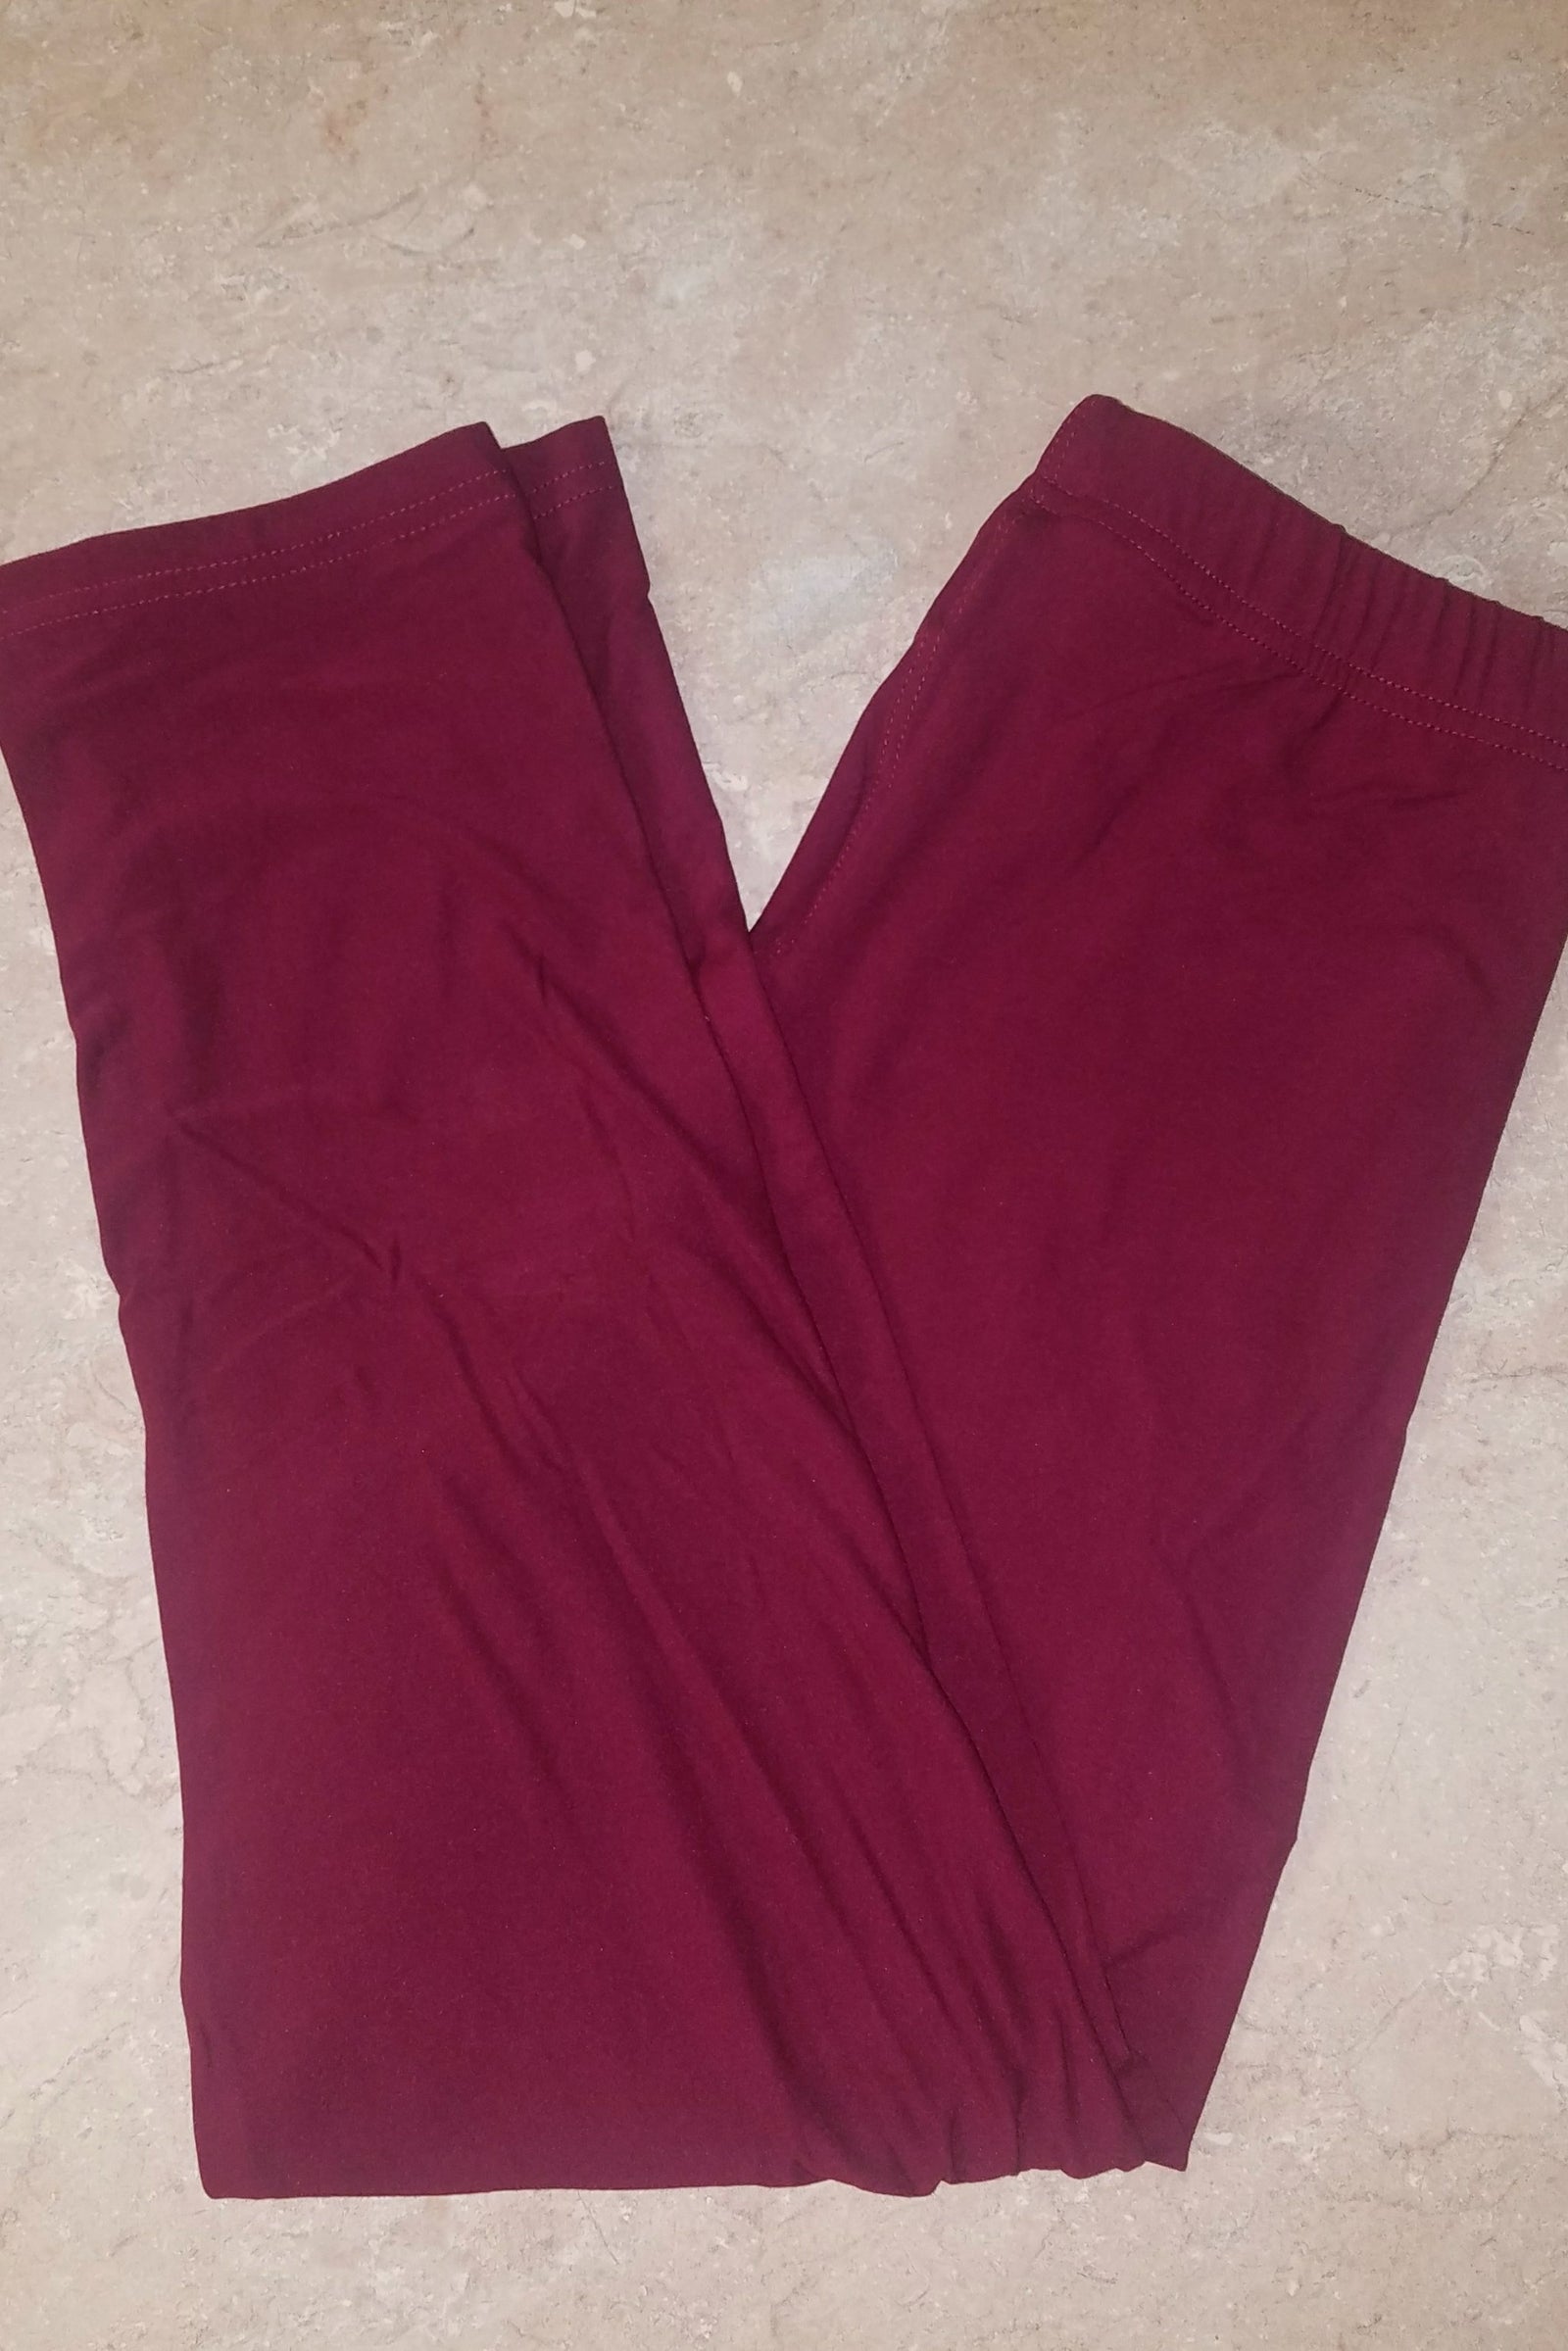 Solid Burgundy Yoga Pants – The Paisley Rooster Boutique